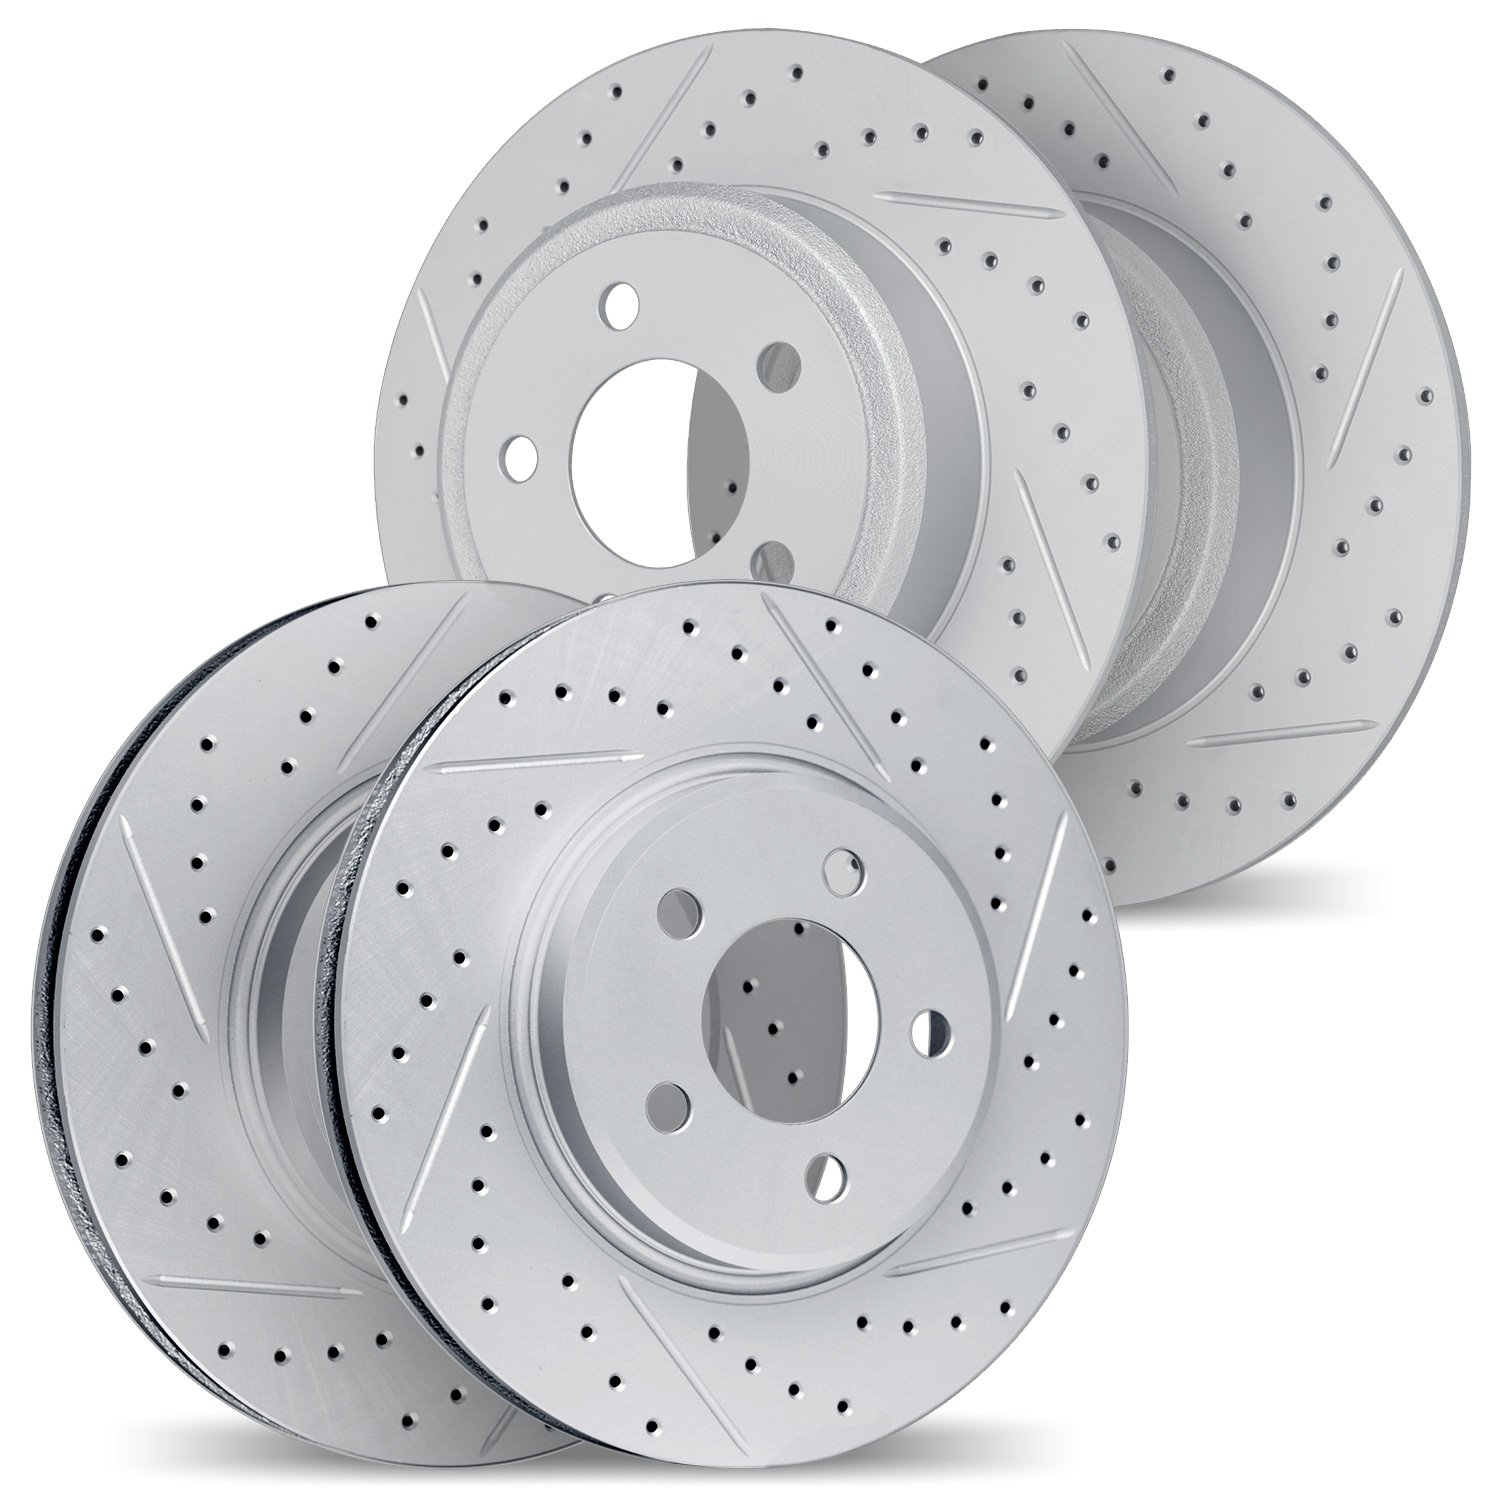 2004-76006 Geoperformance Drilled/Slotted Brake Rotors, 2012-2018 Lexus/Toyota/Scion, Position: Front and Rear